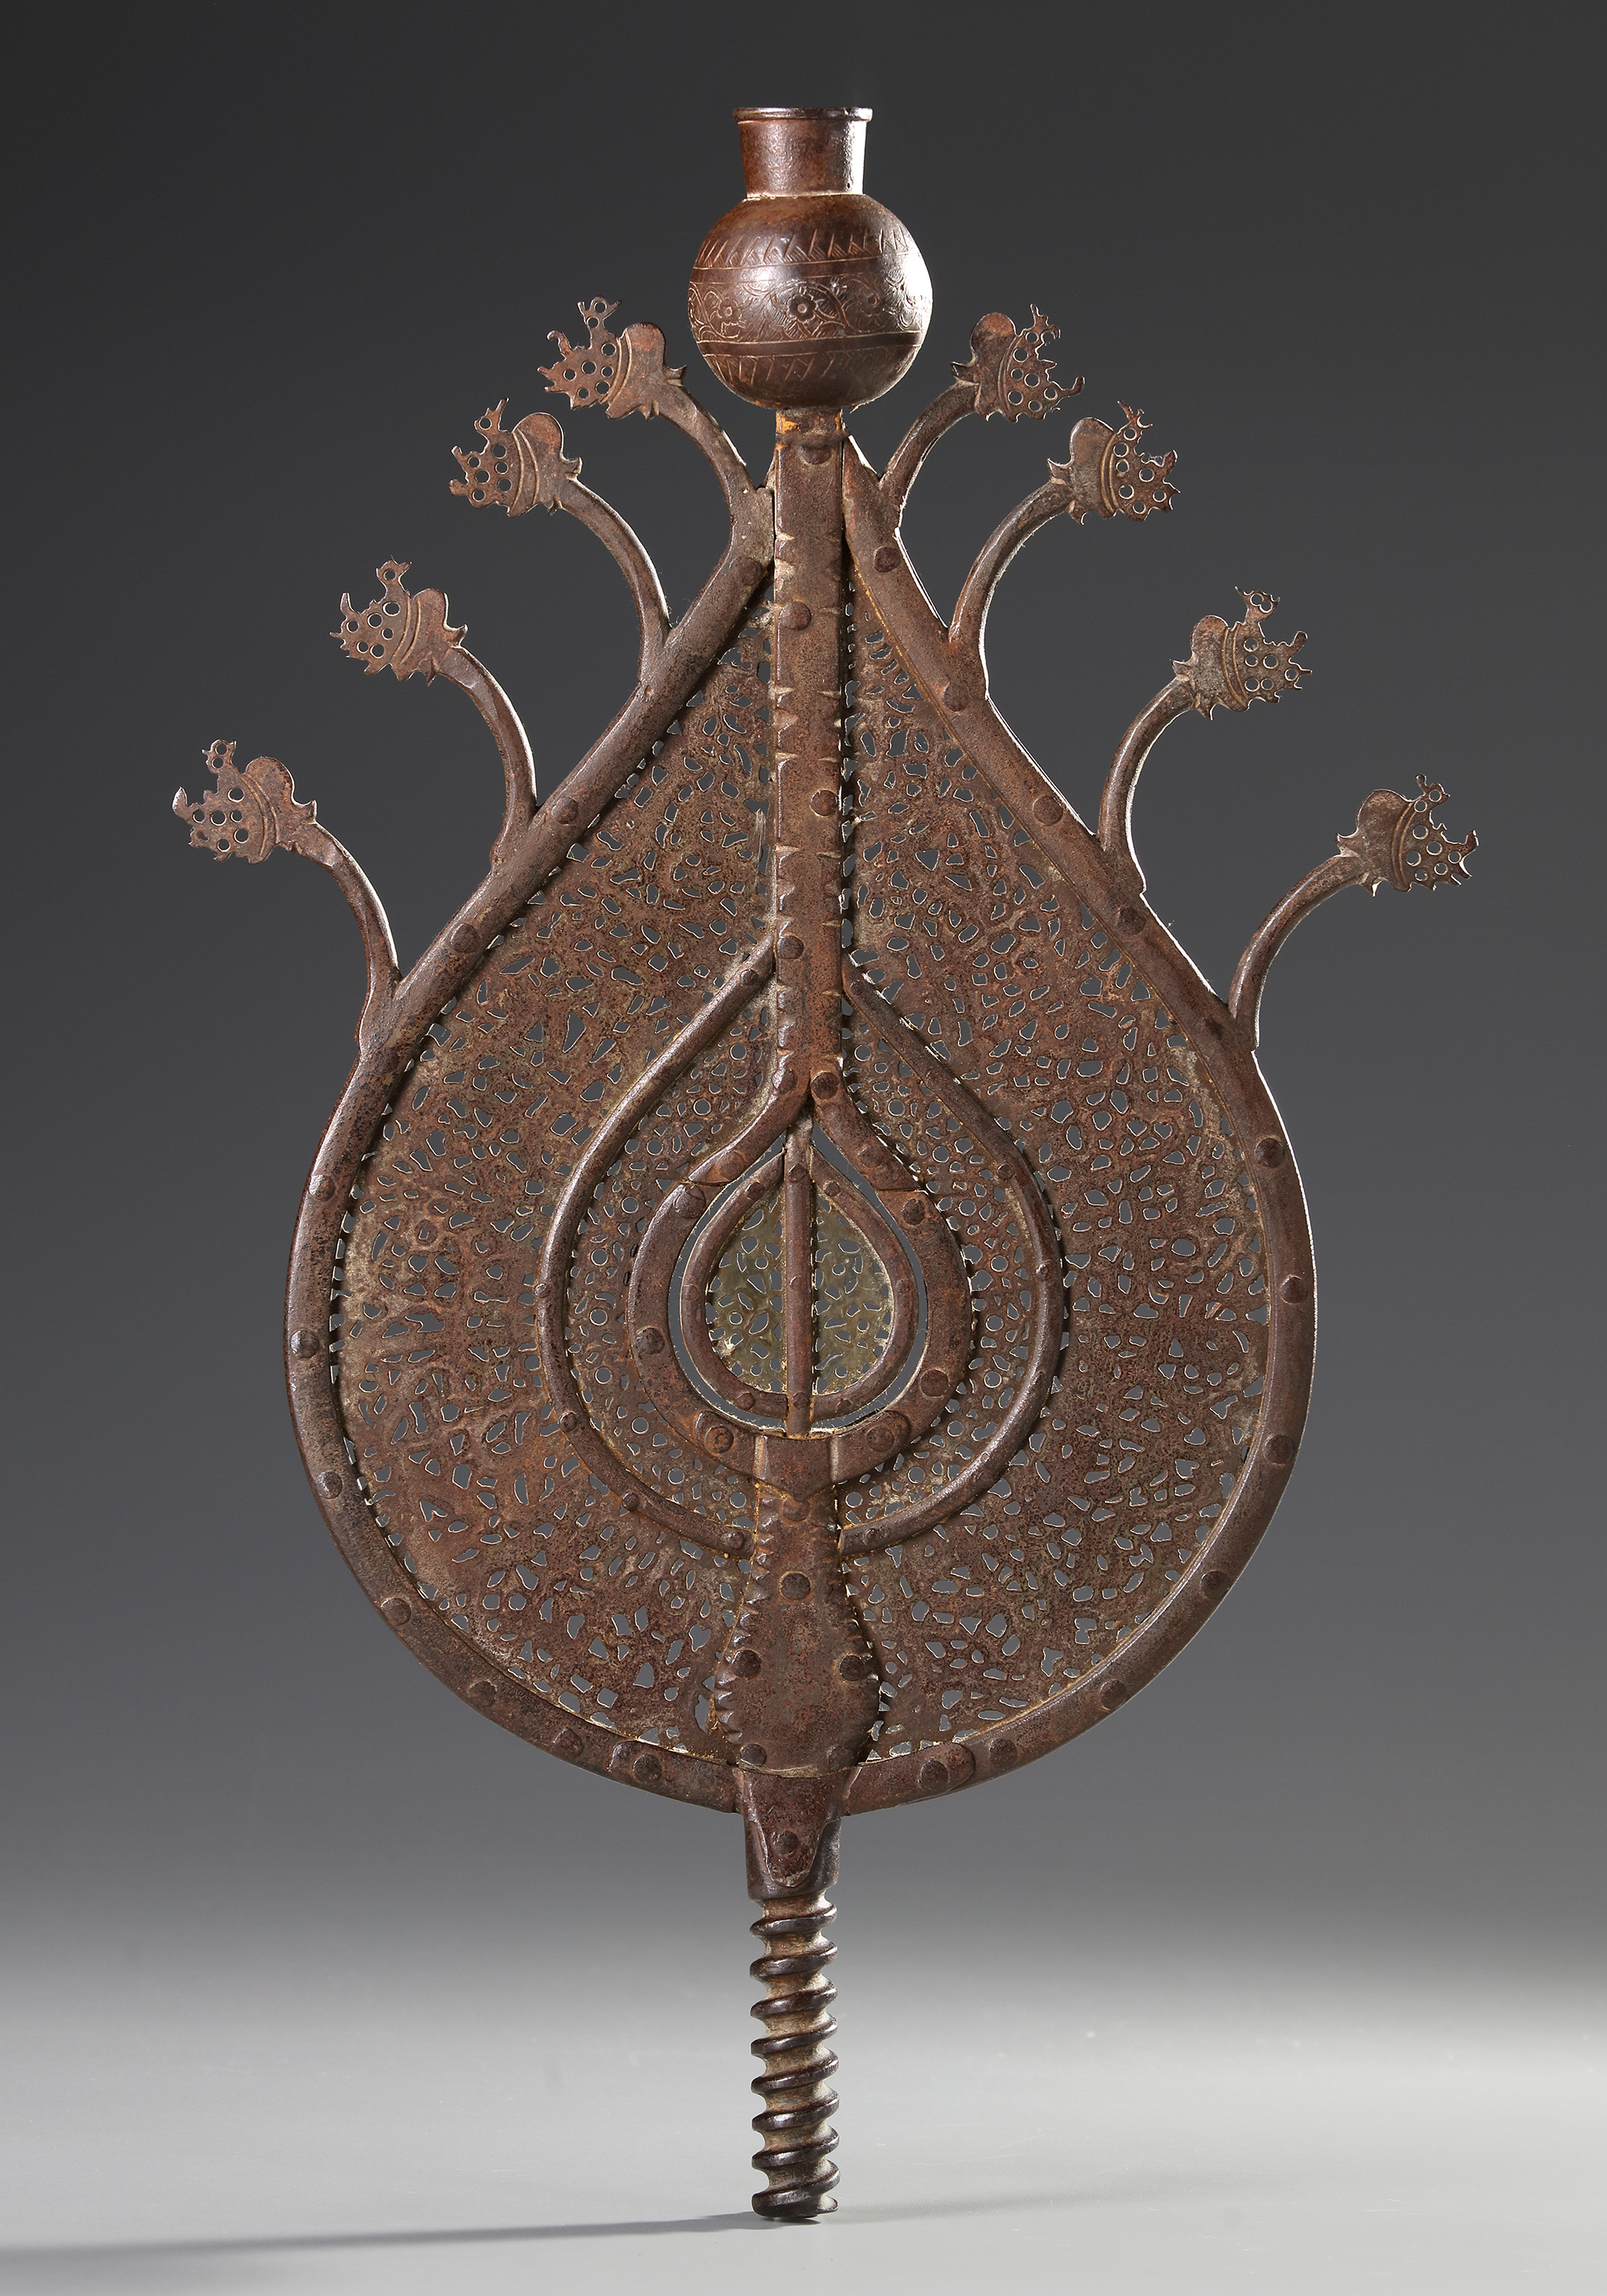 AN EARLY SAFAVID PIERCED BRONZE PROCESSIONAL STANDARD (ALAM), PERSIA, DATED 924 AH/1518 AD - Image 4 of 4